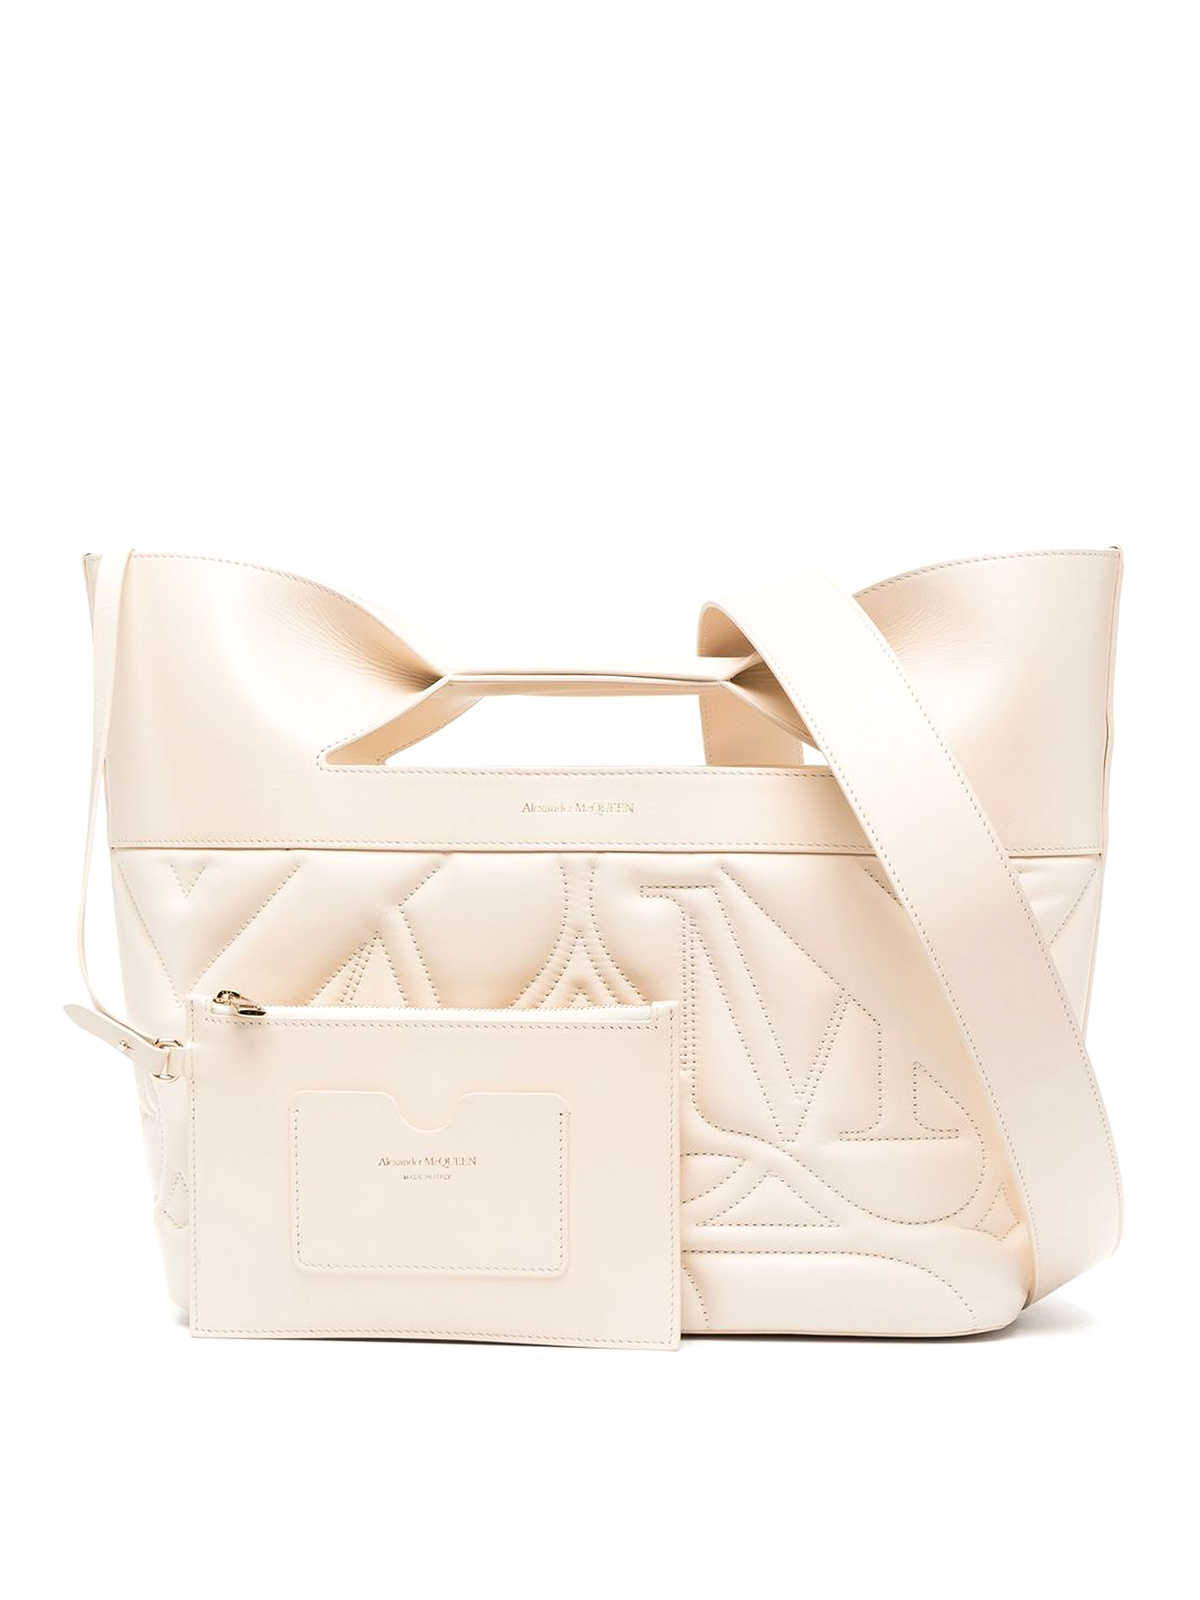 Alexander McQueen The Bow Large Bag